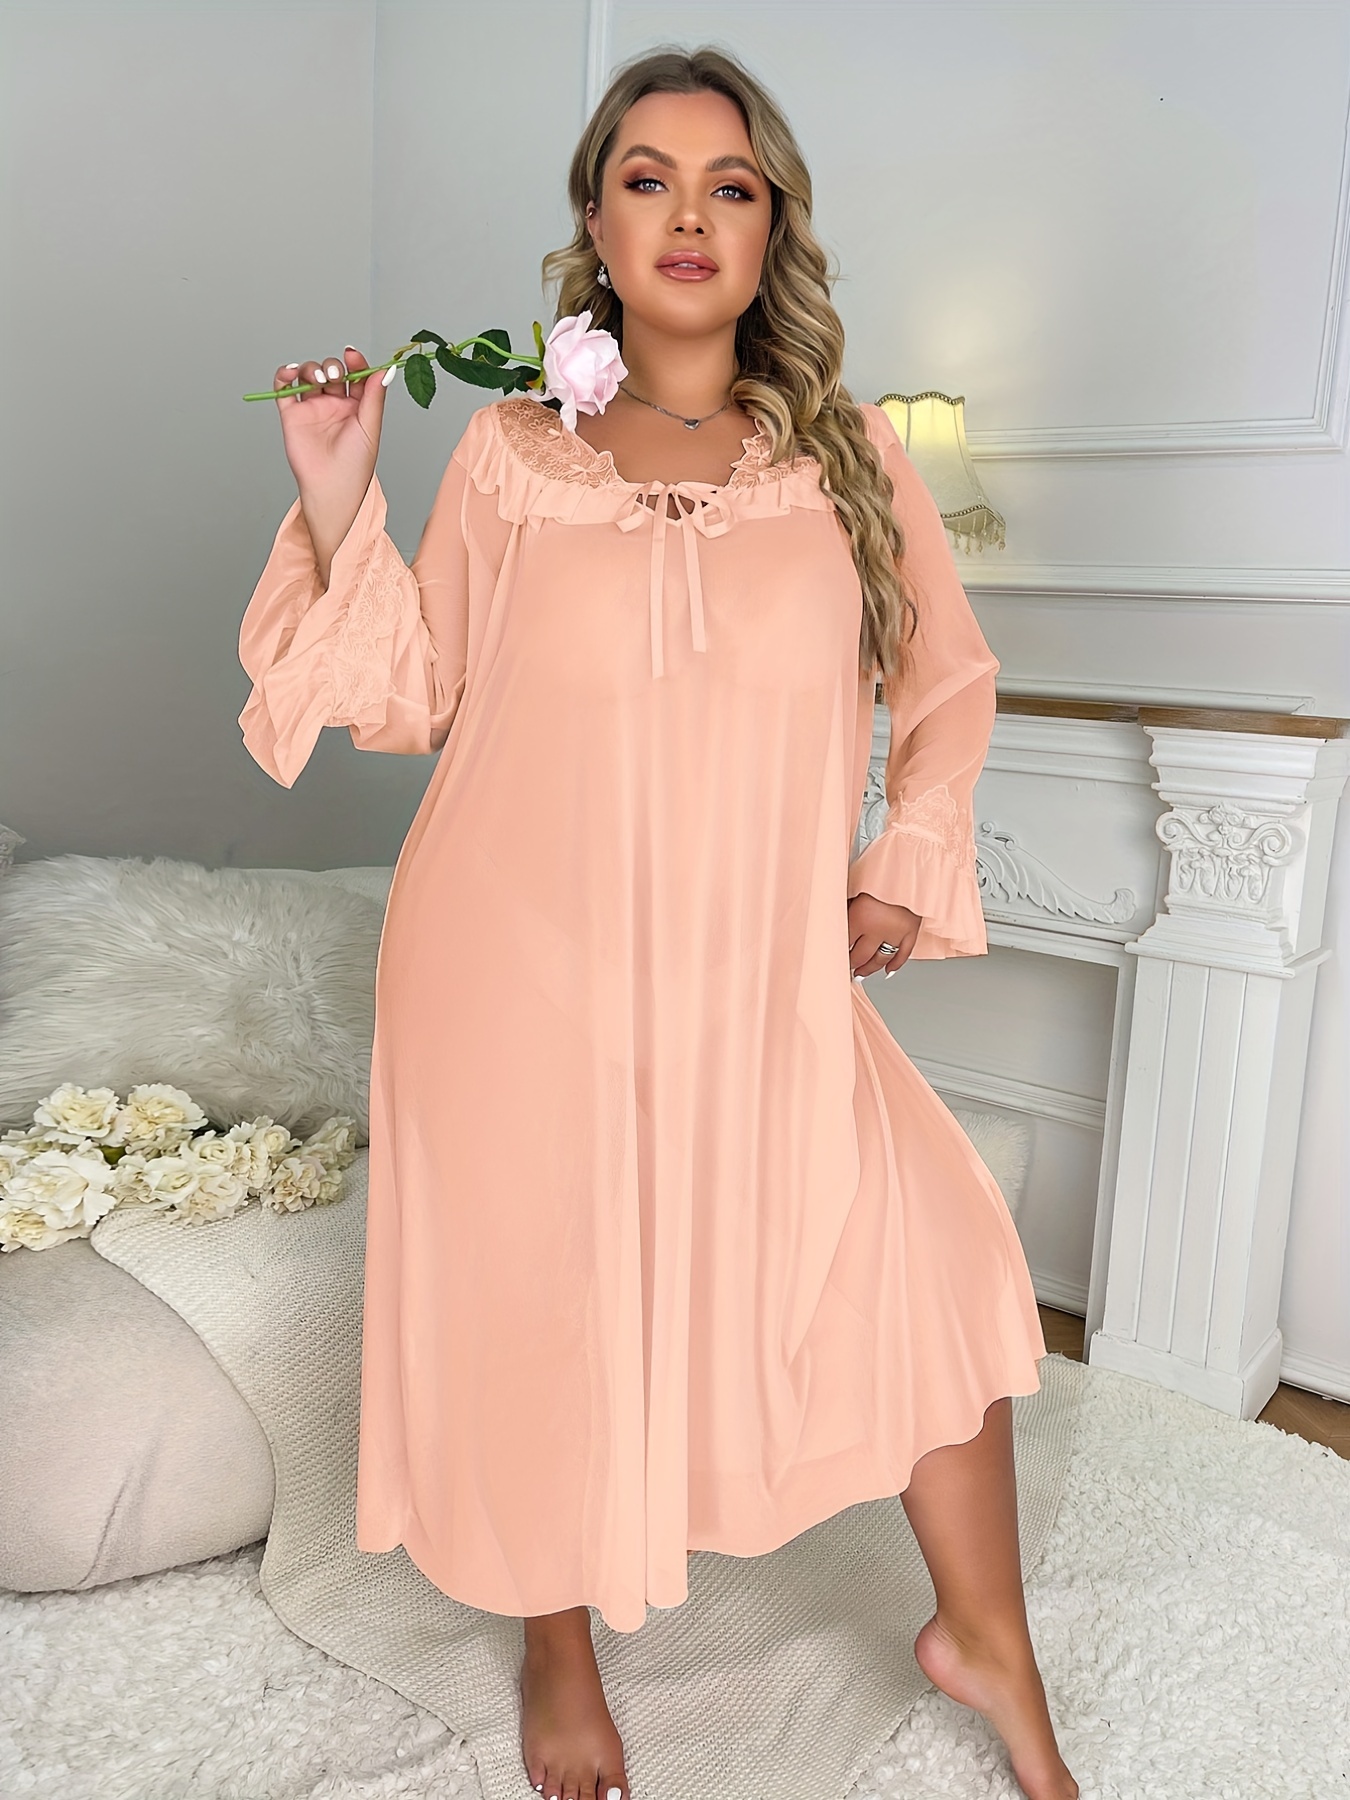 Plus Size Transparent Lace Nightgown With Long Sleeves And Box